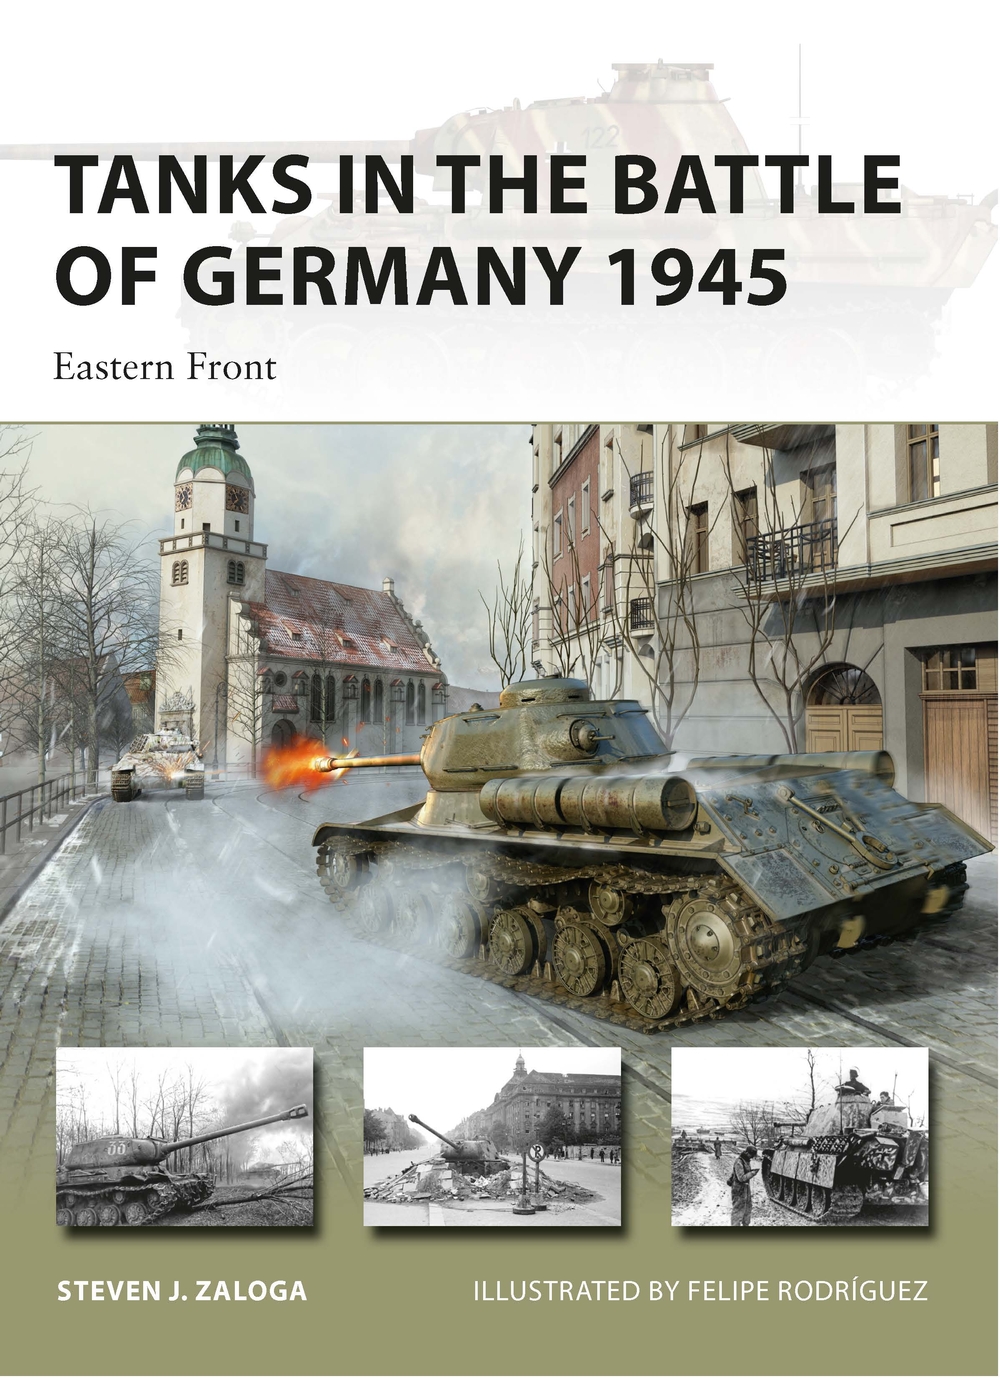 Tanks in the Battle of Germany 1945 book jacket